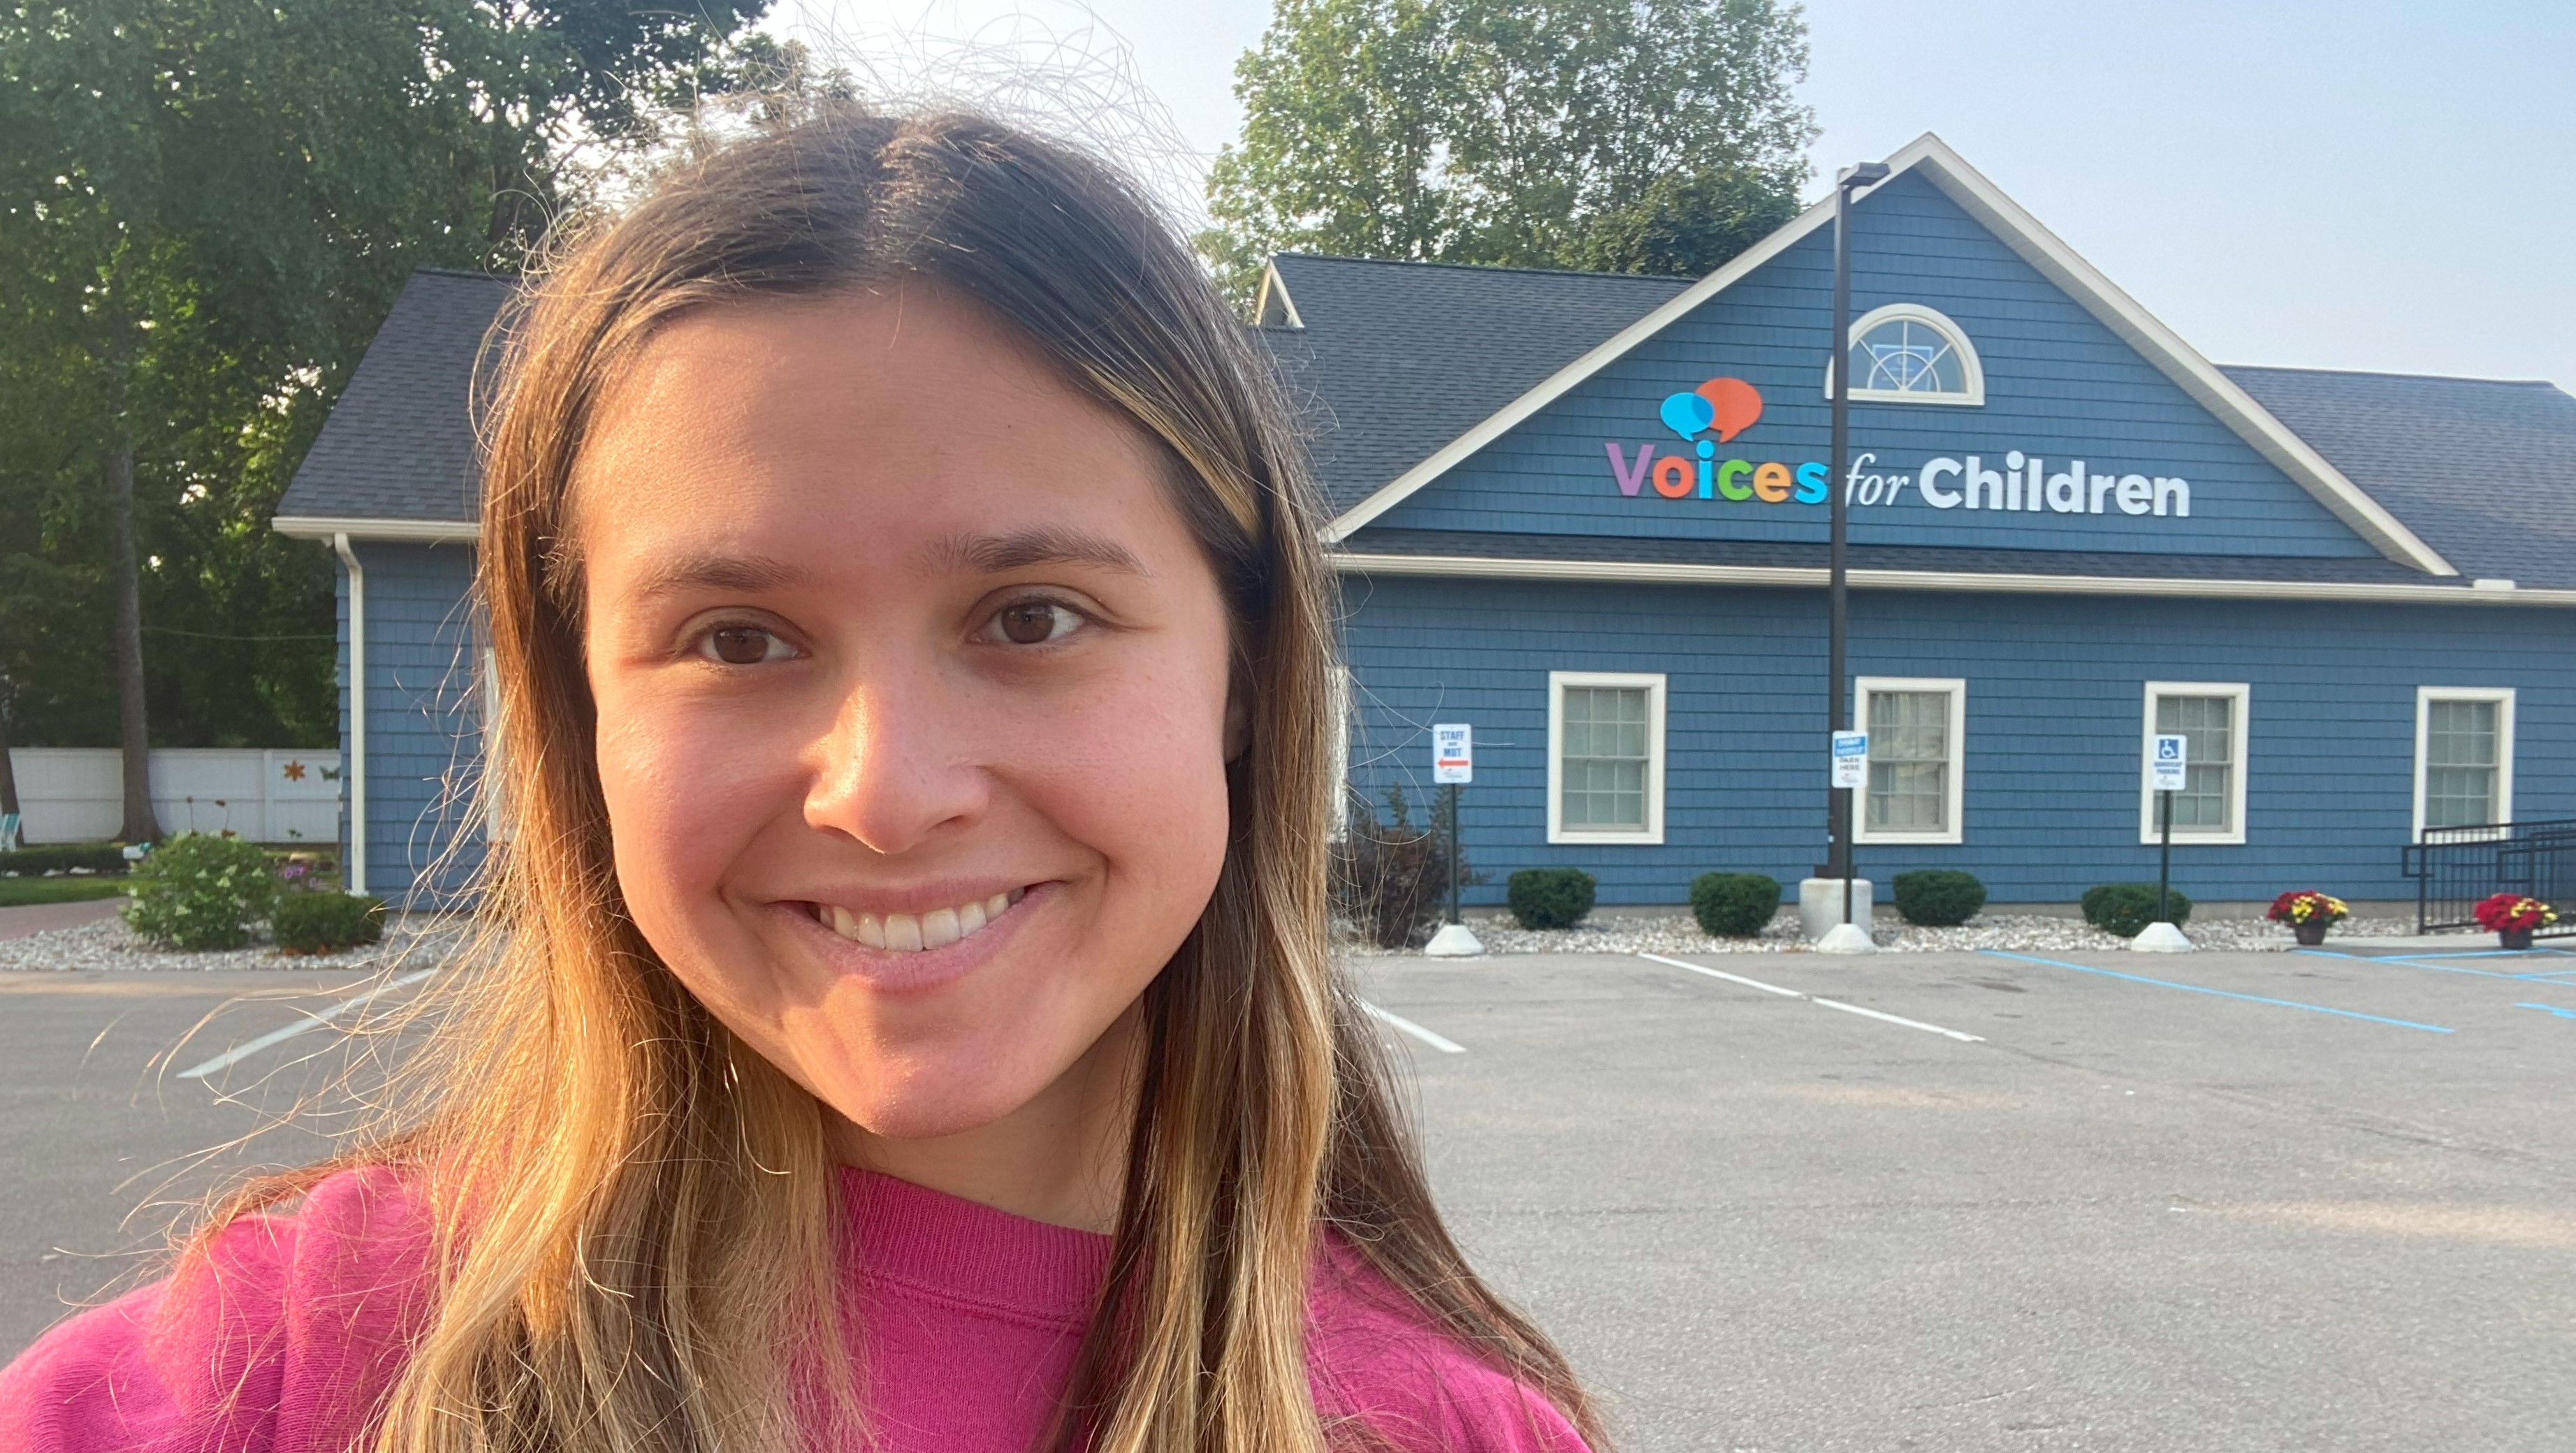 A smiling Olivia Feldman stands in front of the Voices for Children building